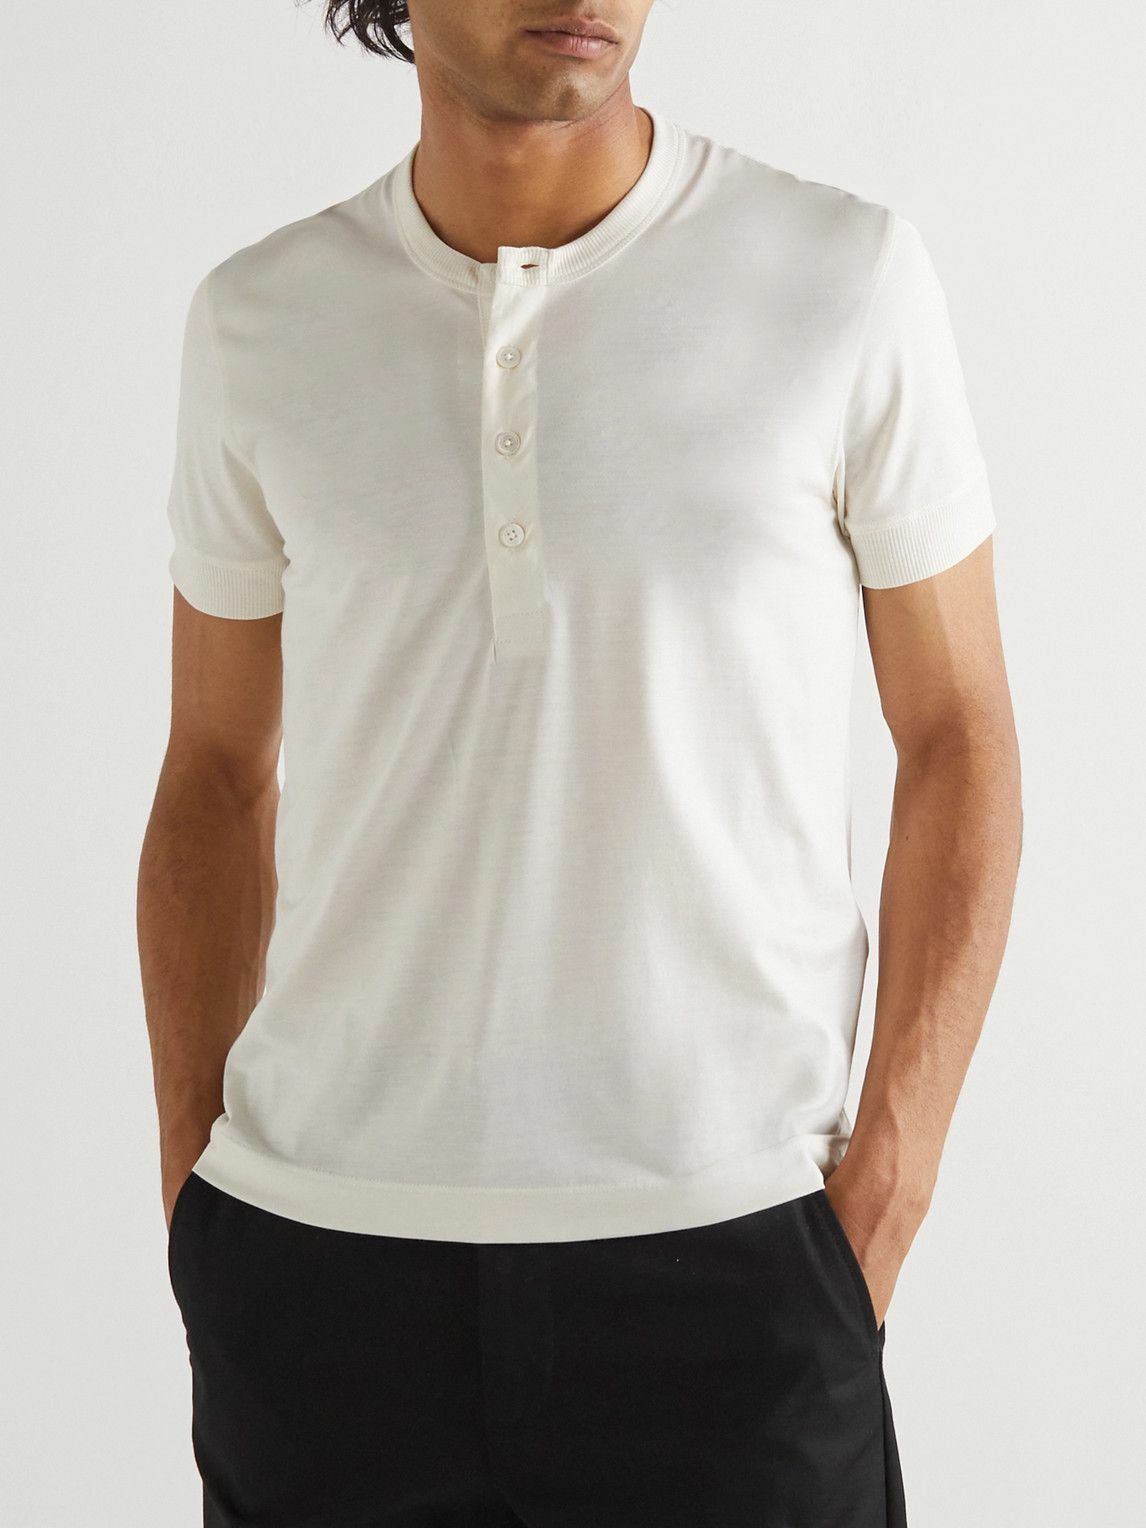 TOM FORD - Silk and Cotton-Blend Jersey Henley T-Shirt - White TOM FORD